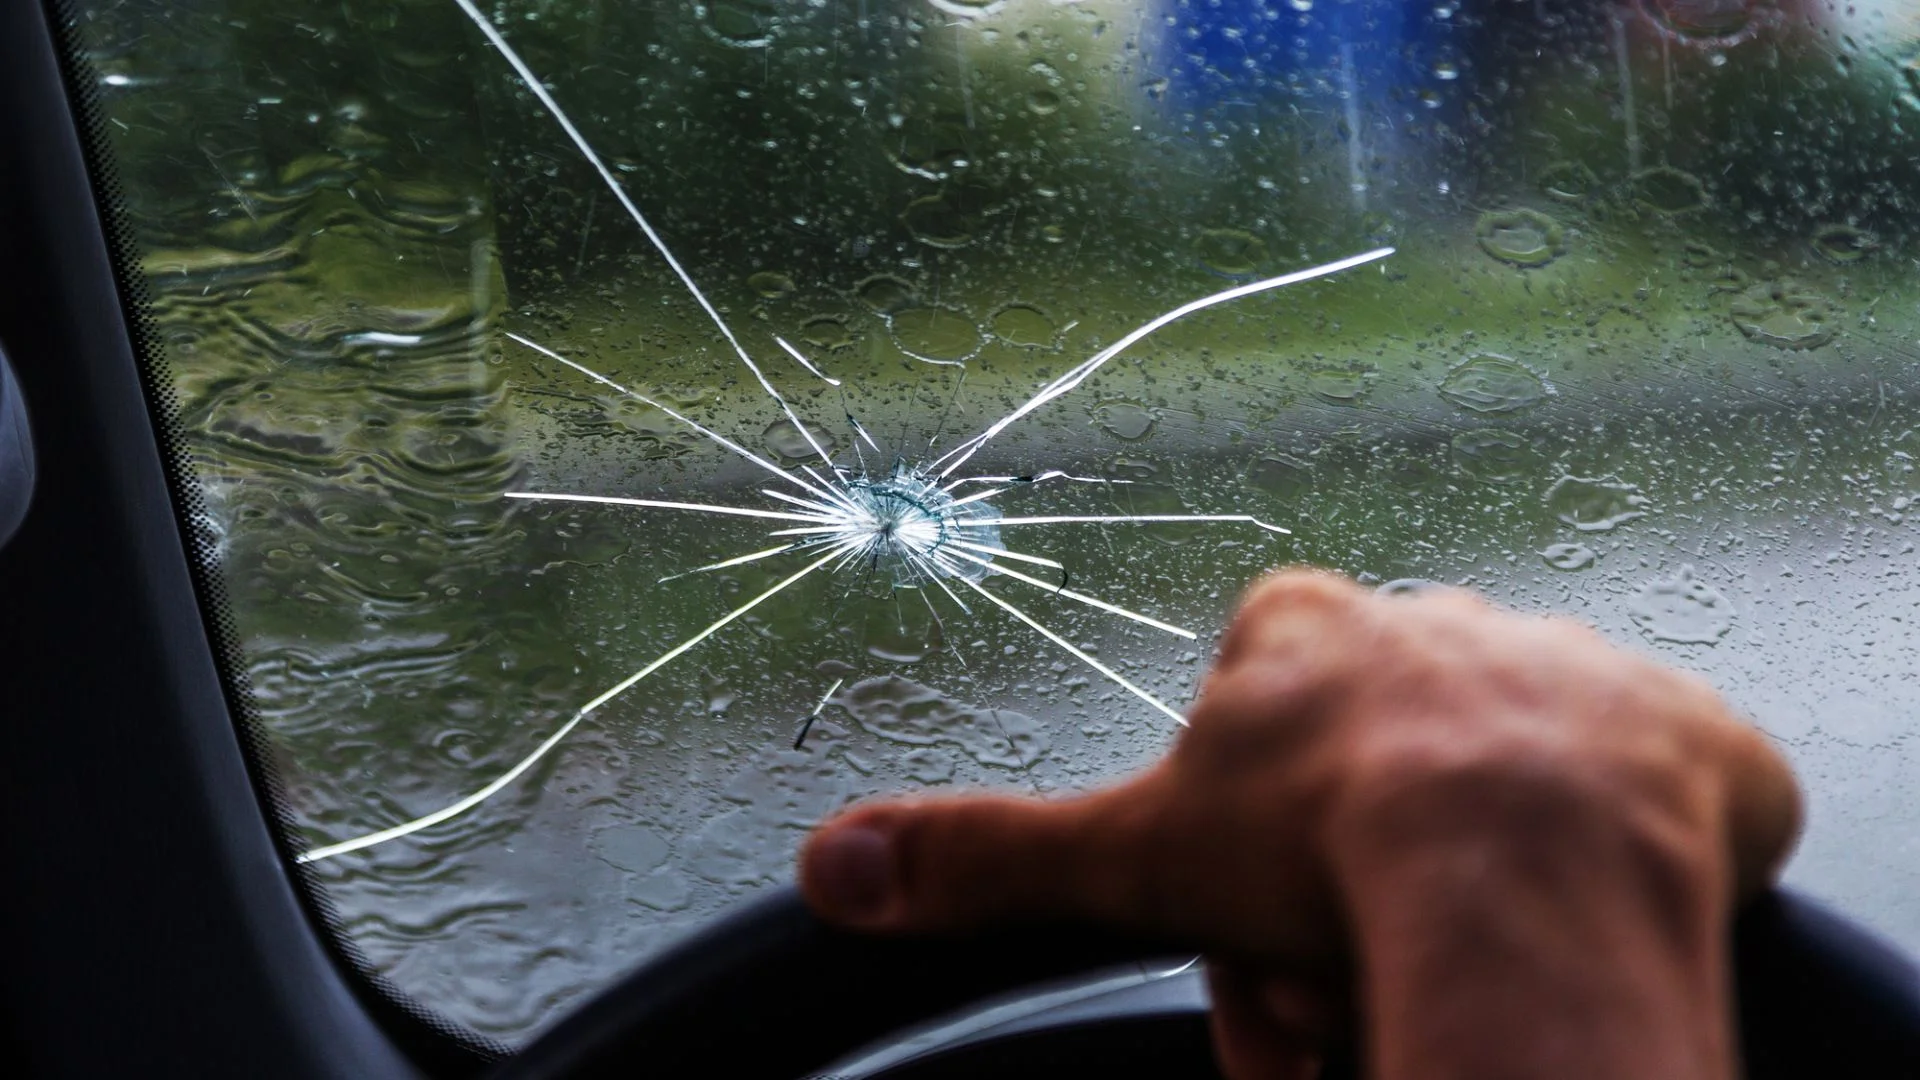 Press Release: Avenue Auto Glass Reminds Drivers of Helpful Tips to Prevent Vancouver Auto Glass Damage